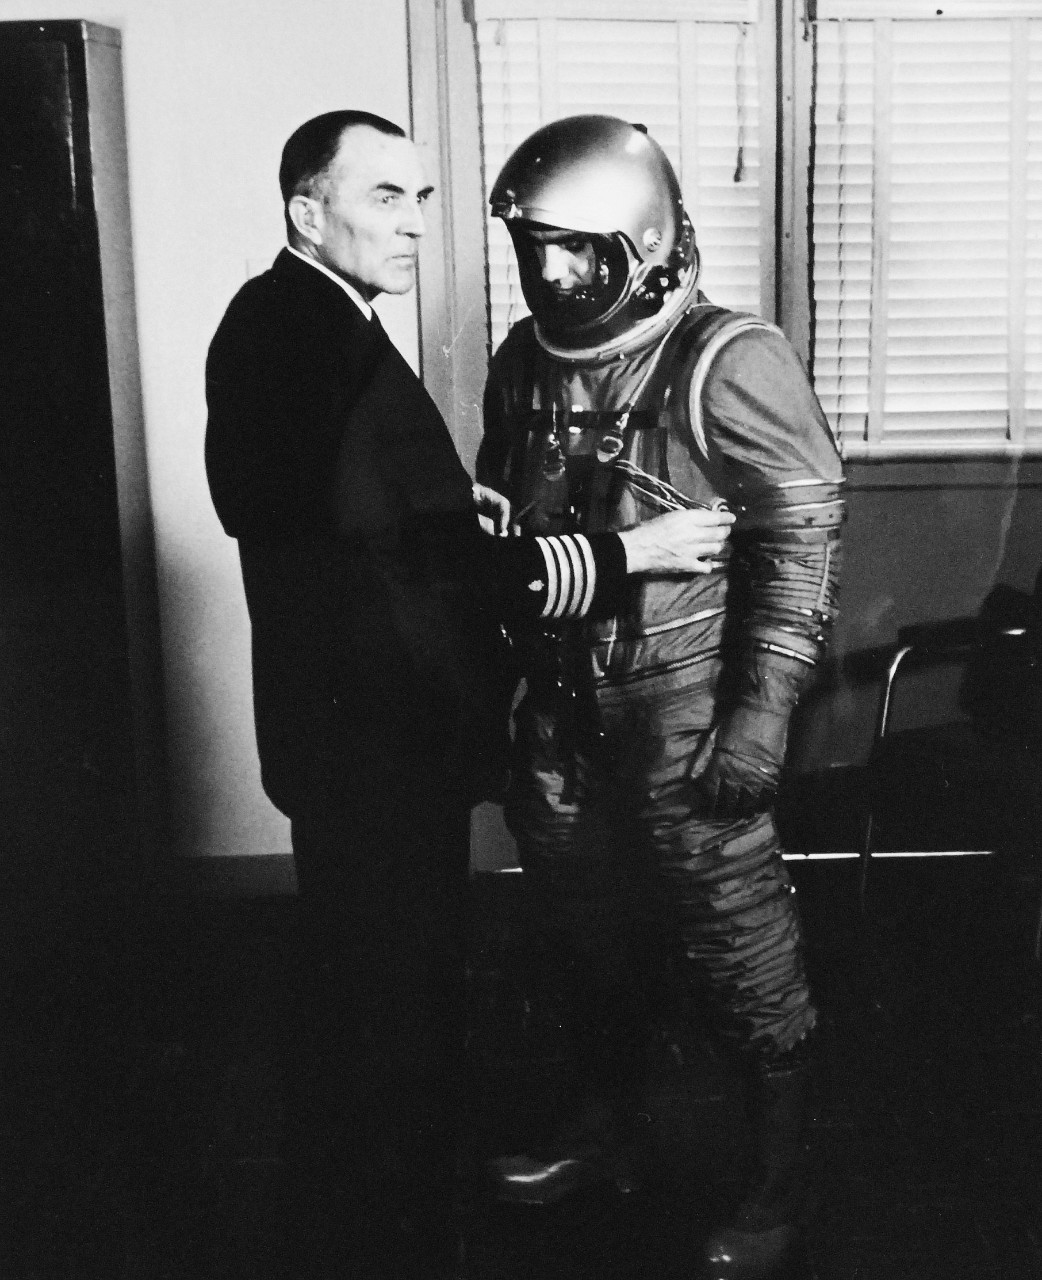 330-PS-8850-6:  U.S. Navy Conducts Physical Studies By Telephone.  Captain Norman Lee Barr, MC, USN, connects electrode lands from subject dressed for high-altitude flight, March 21, 1958.  Official Department of Defense photograph, now in the collection of the National Archives.   